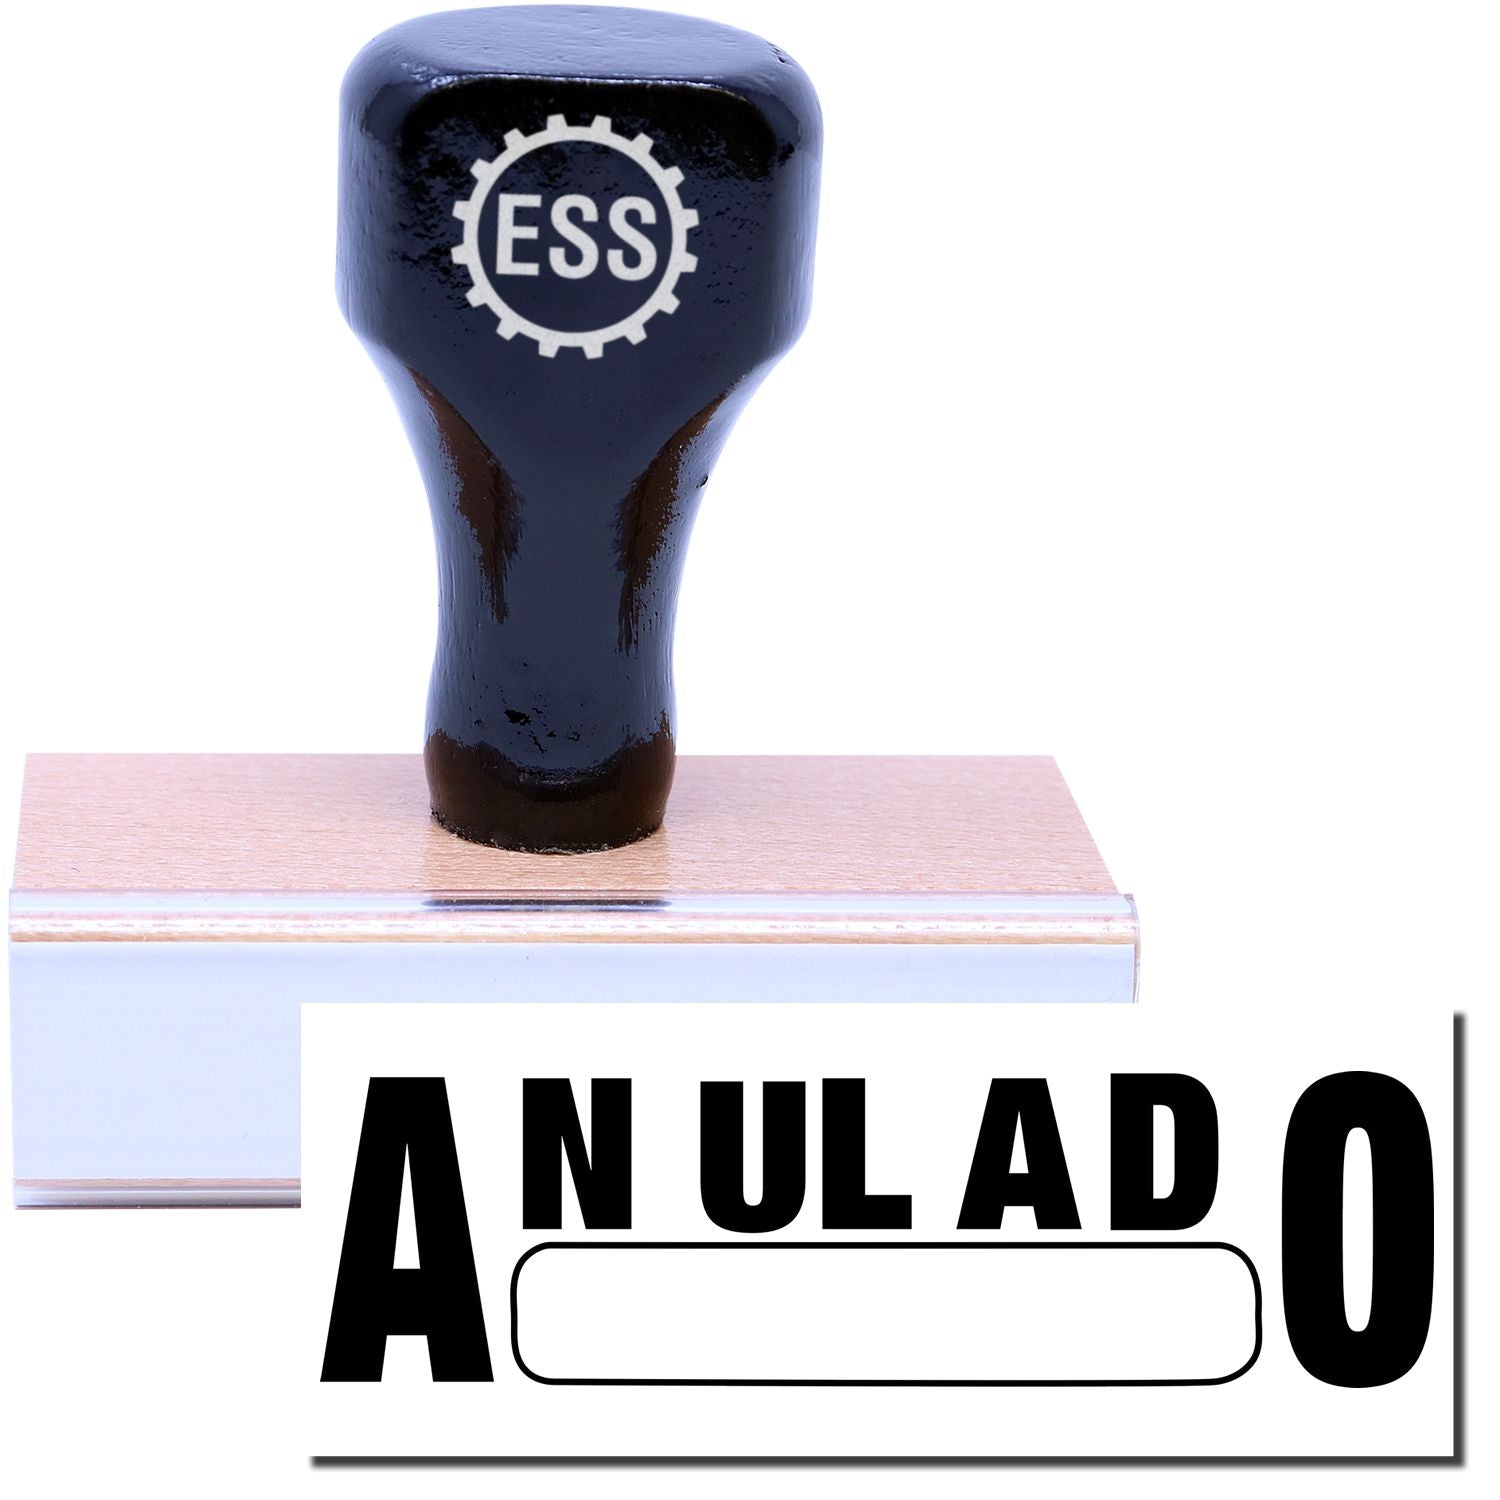 A stock office rubber stamp with a stamped image showing how the text "ANULADO" with a box is displayed after stamping.